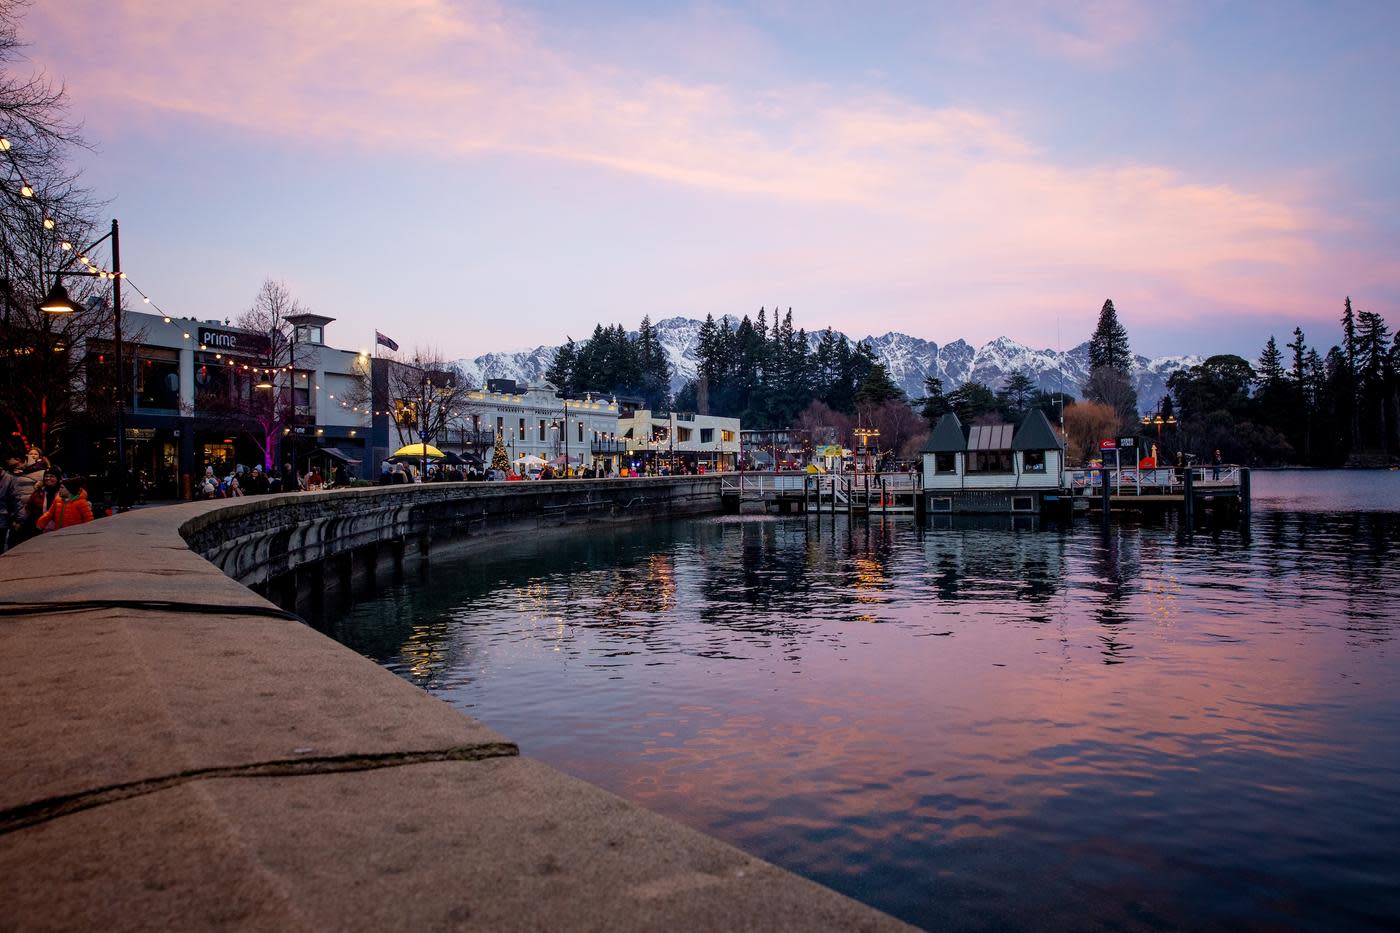 Queenstown waterfront in winter at sunset with the Remarkables mountain range covered in snow